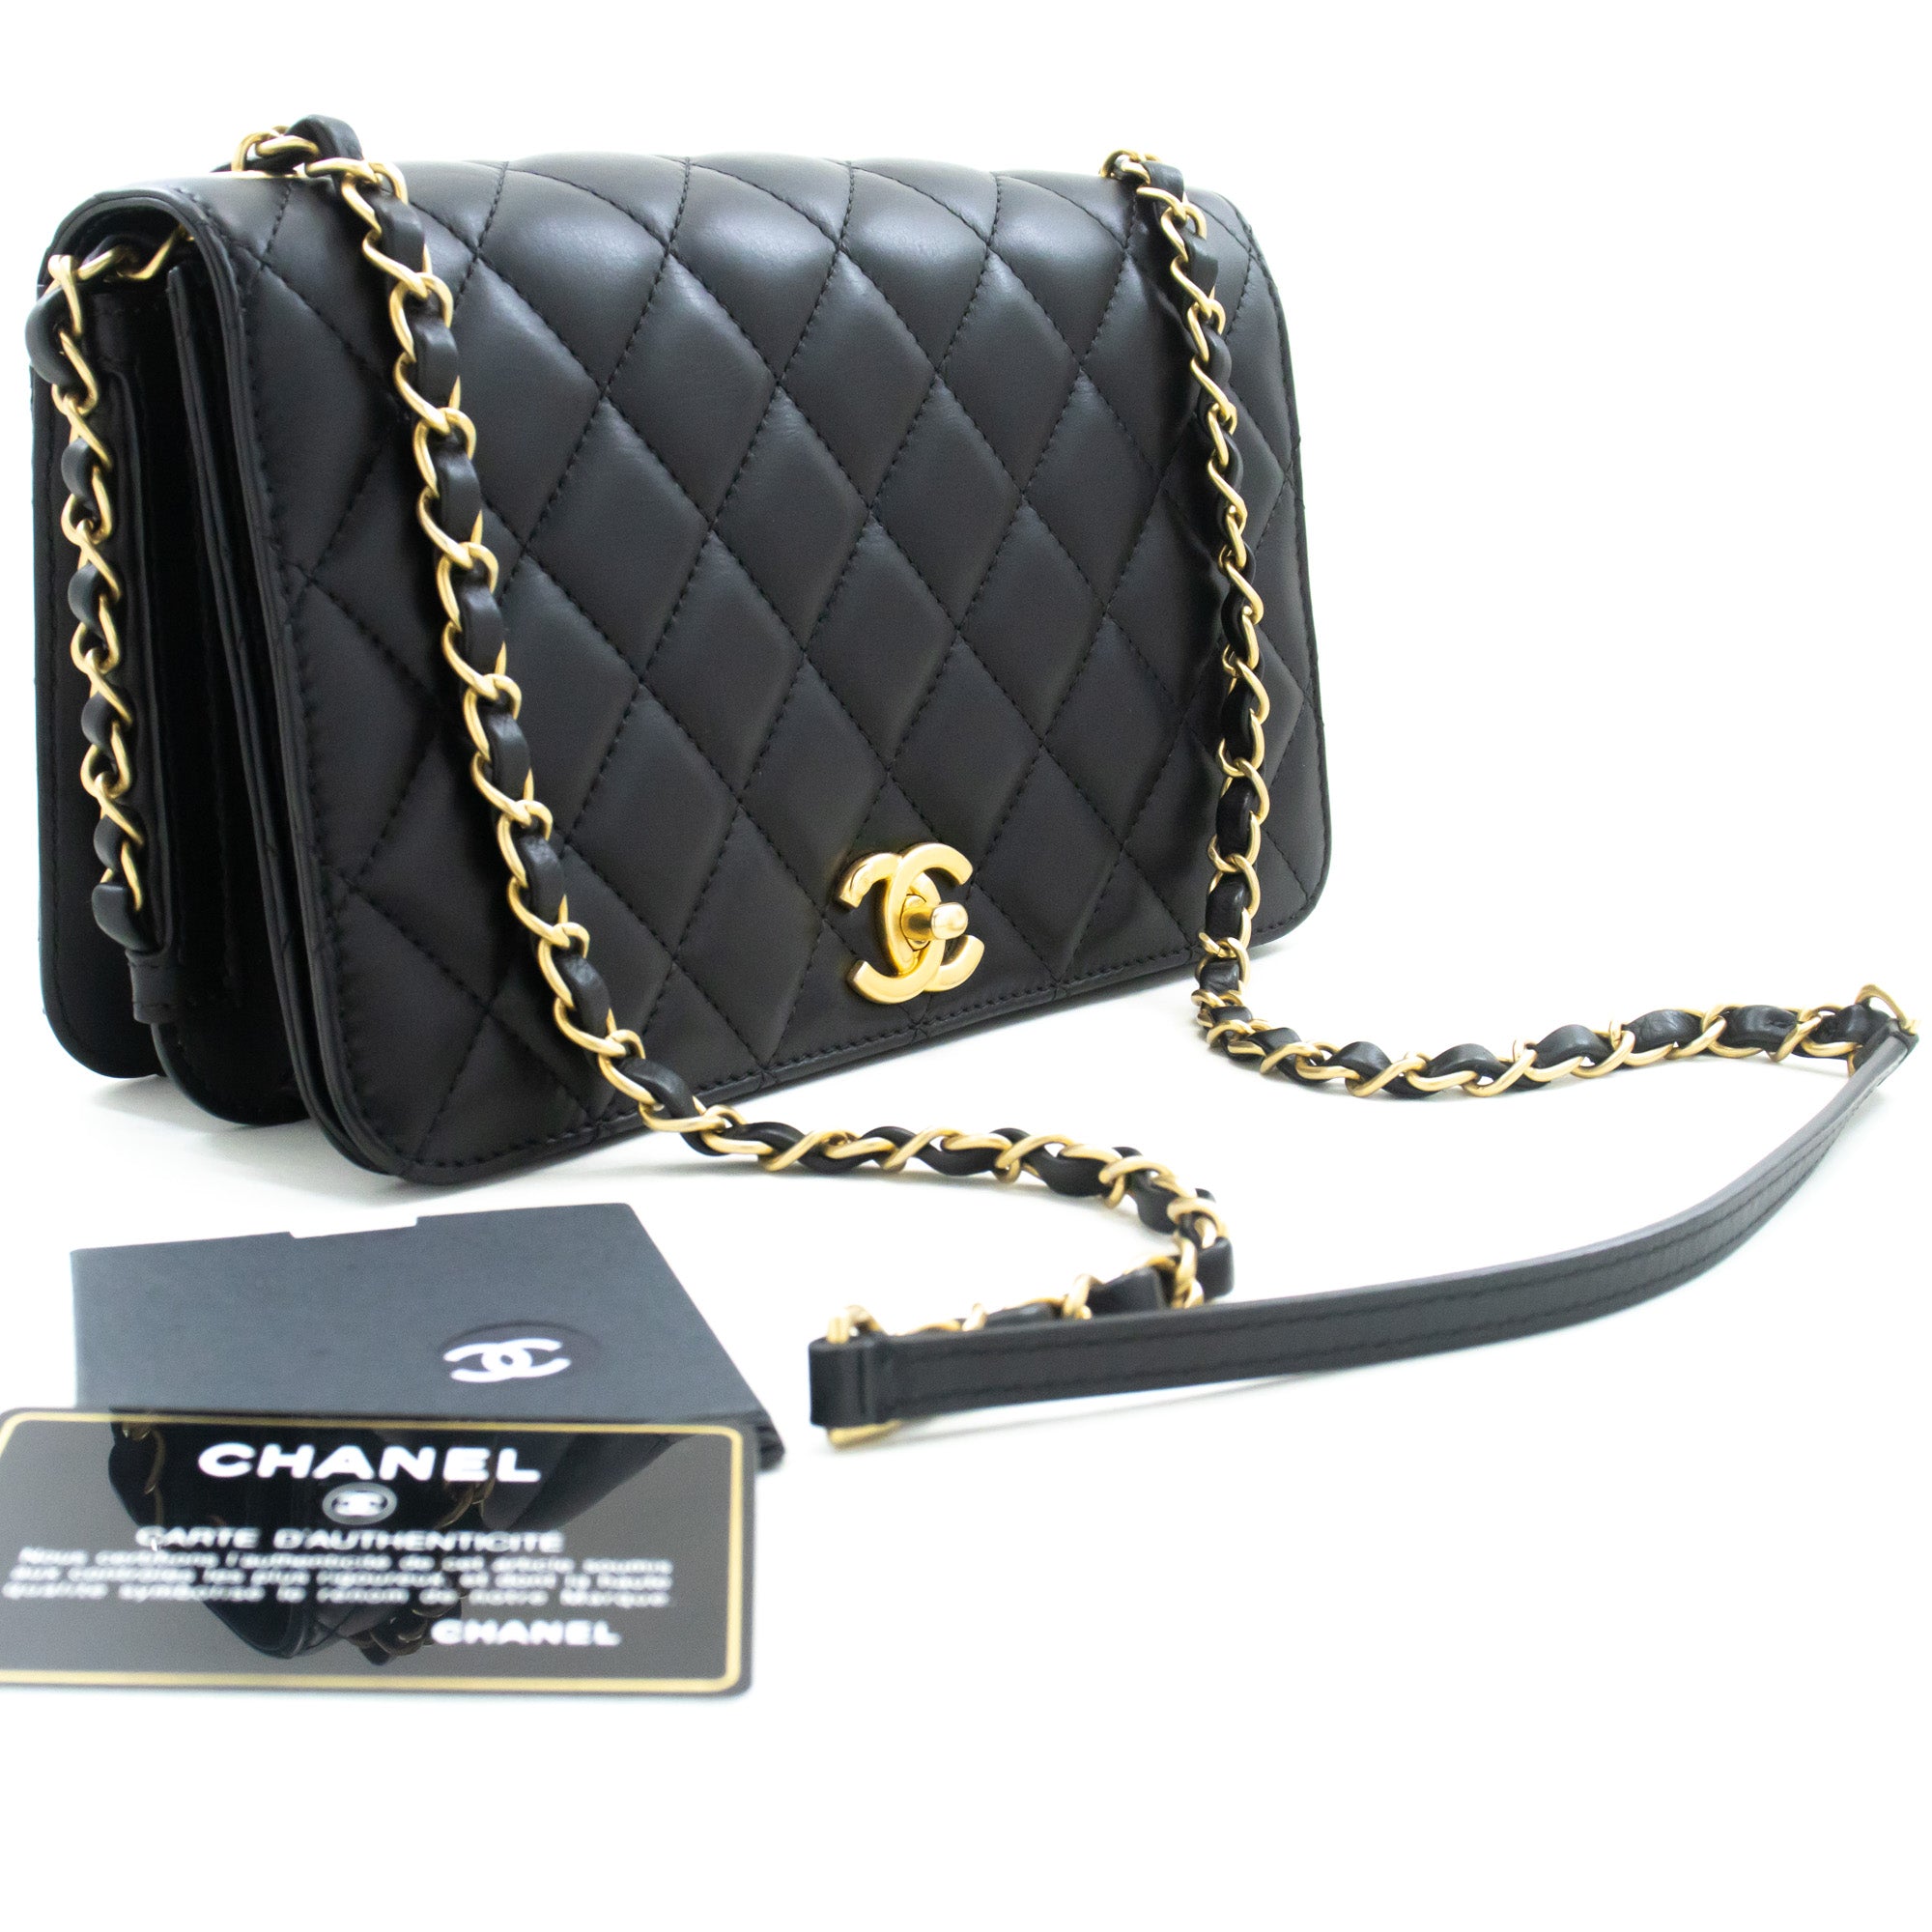 CHANEL Full Flap Chain Shoulder Bag Black Quilted Lambskin Leather m54